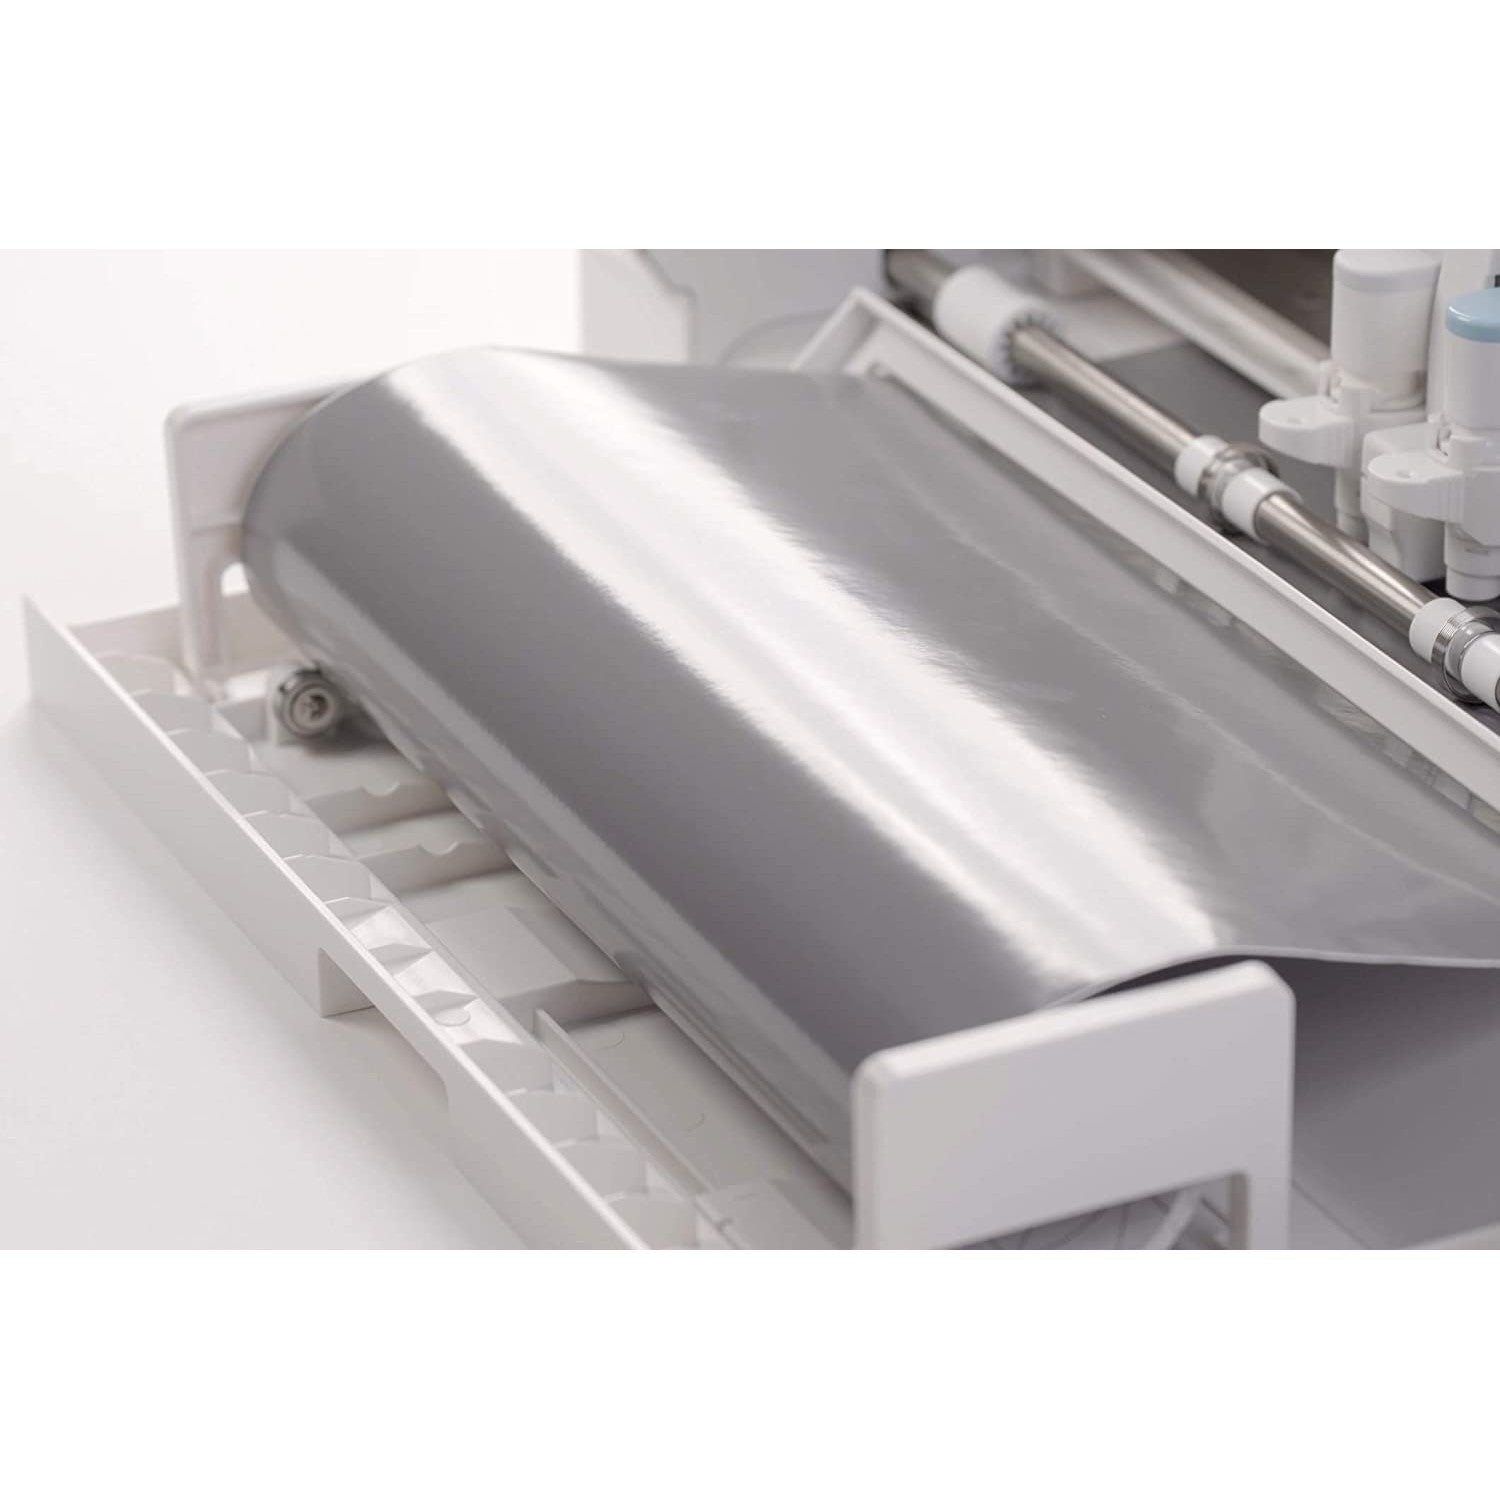 Cameo 4 Silhouette Cutting Machine White Powerful Precision Cutting-Stationery Shredder S-Other-Star Light Kuwait